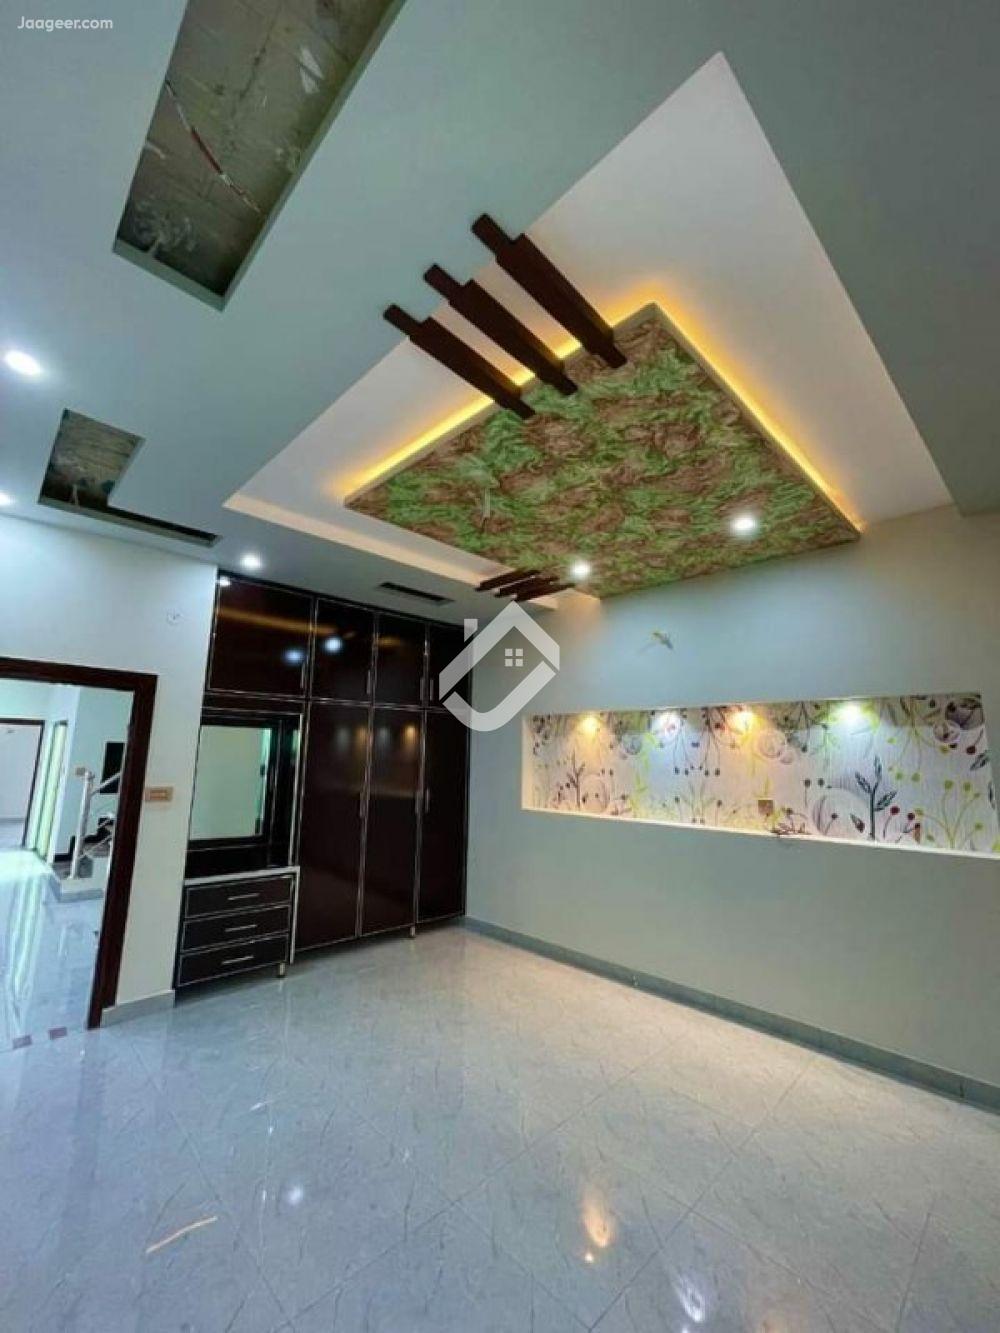 View  7 Marla Double Storey House For Sale At Sillanwali Road in Sillanwali Road, Sargodha